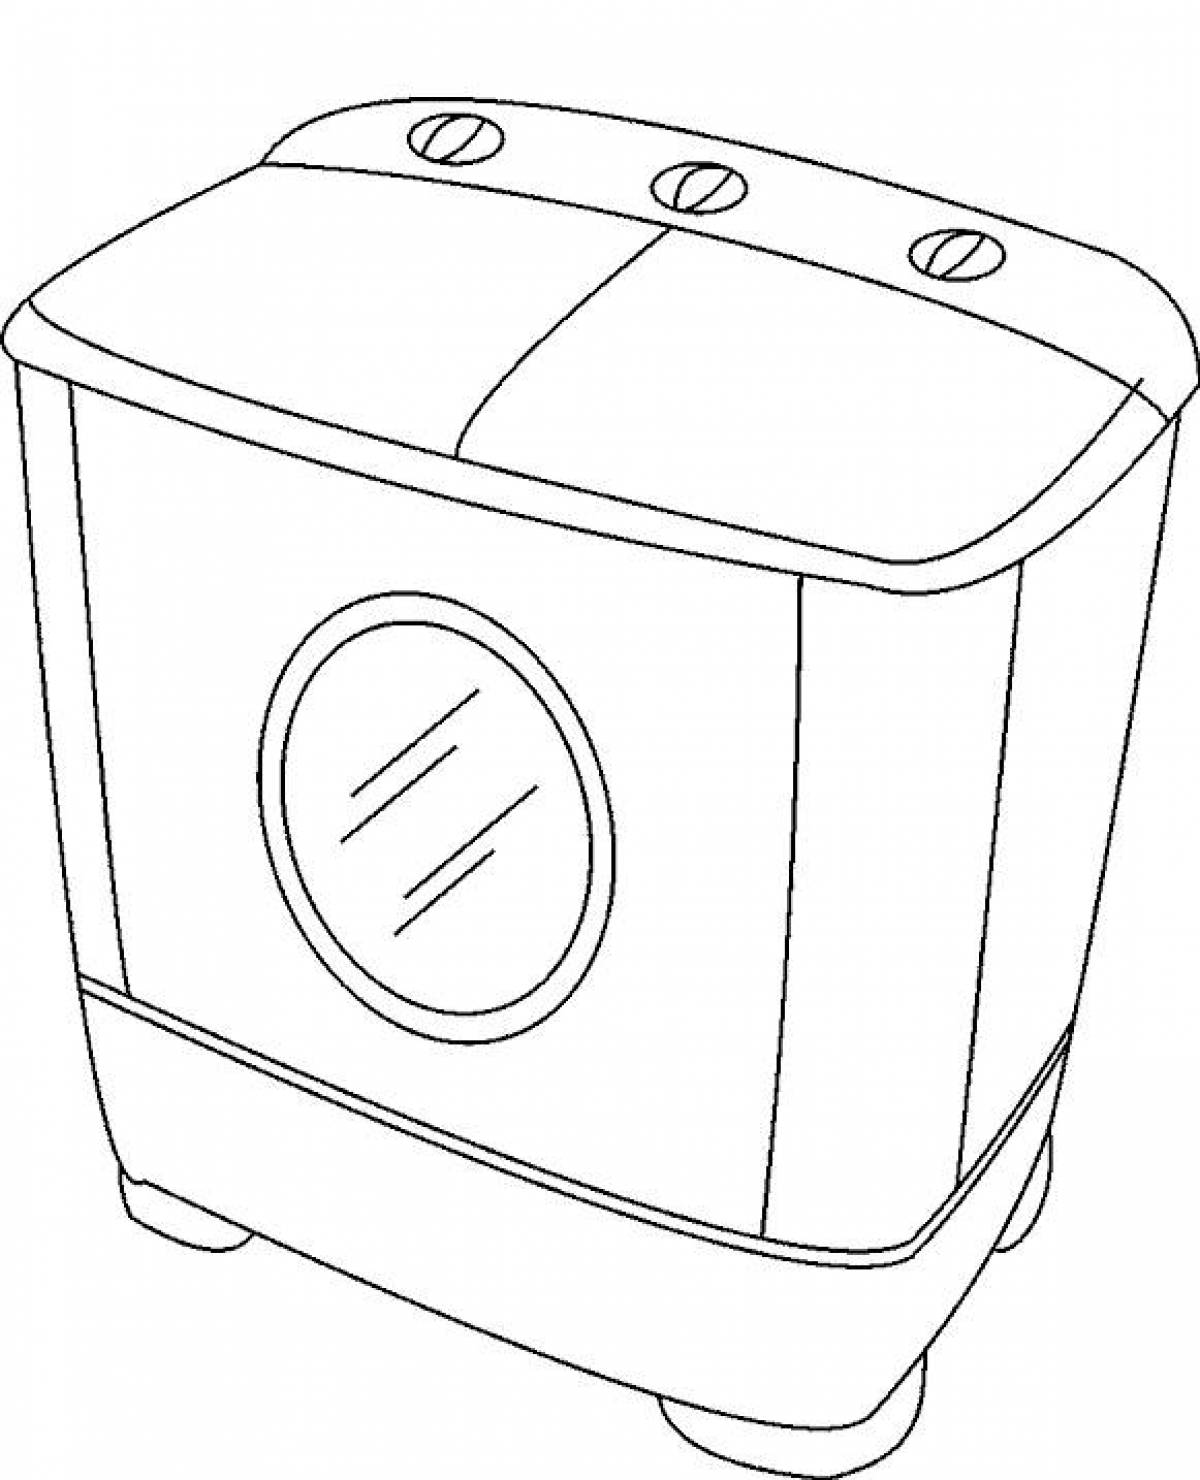 Innovative washing machine coloring page